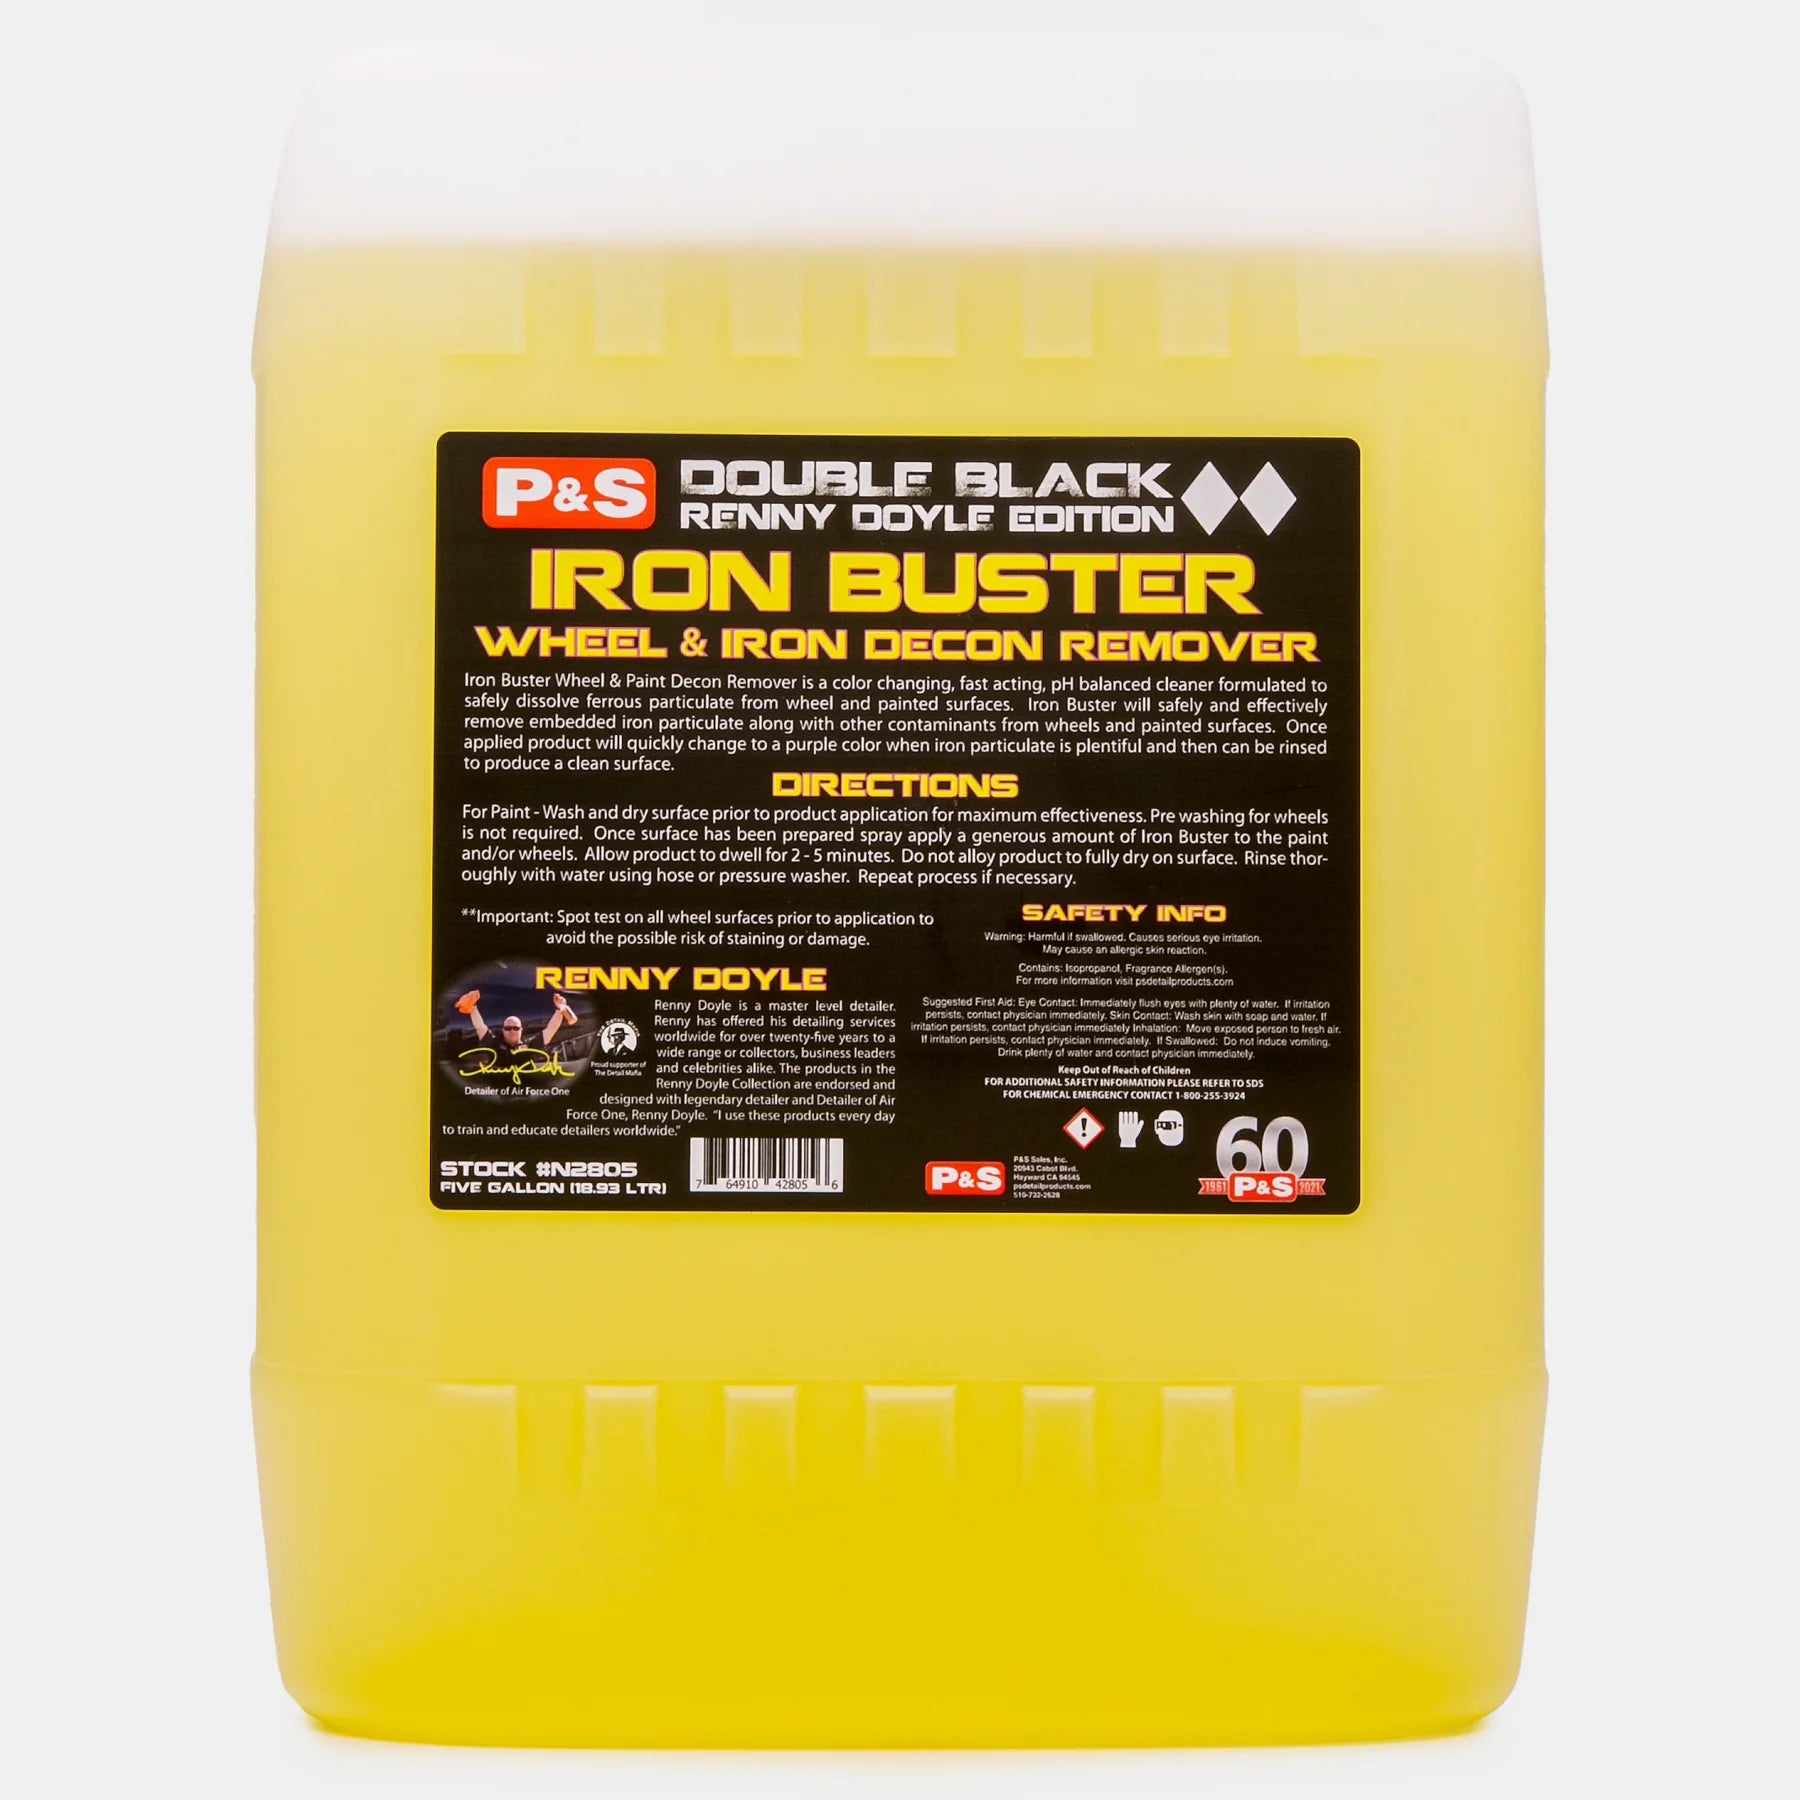 Close-up of P&S Iron Buster 5 gallon-size, showcasing the label and effective formula.